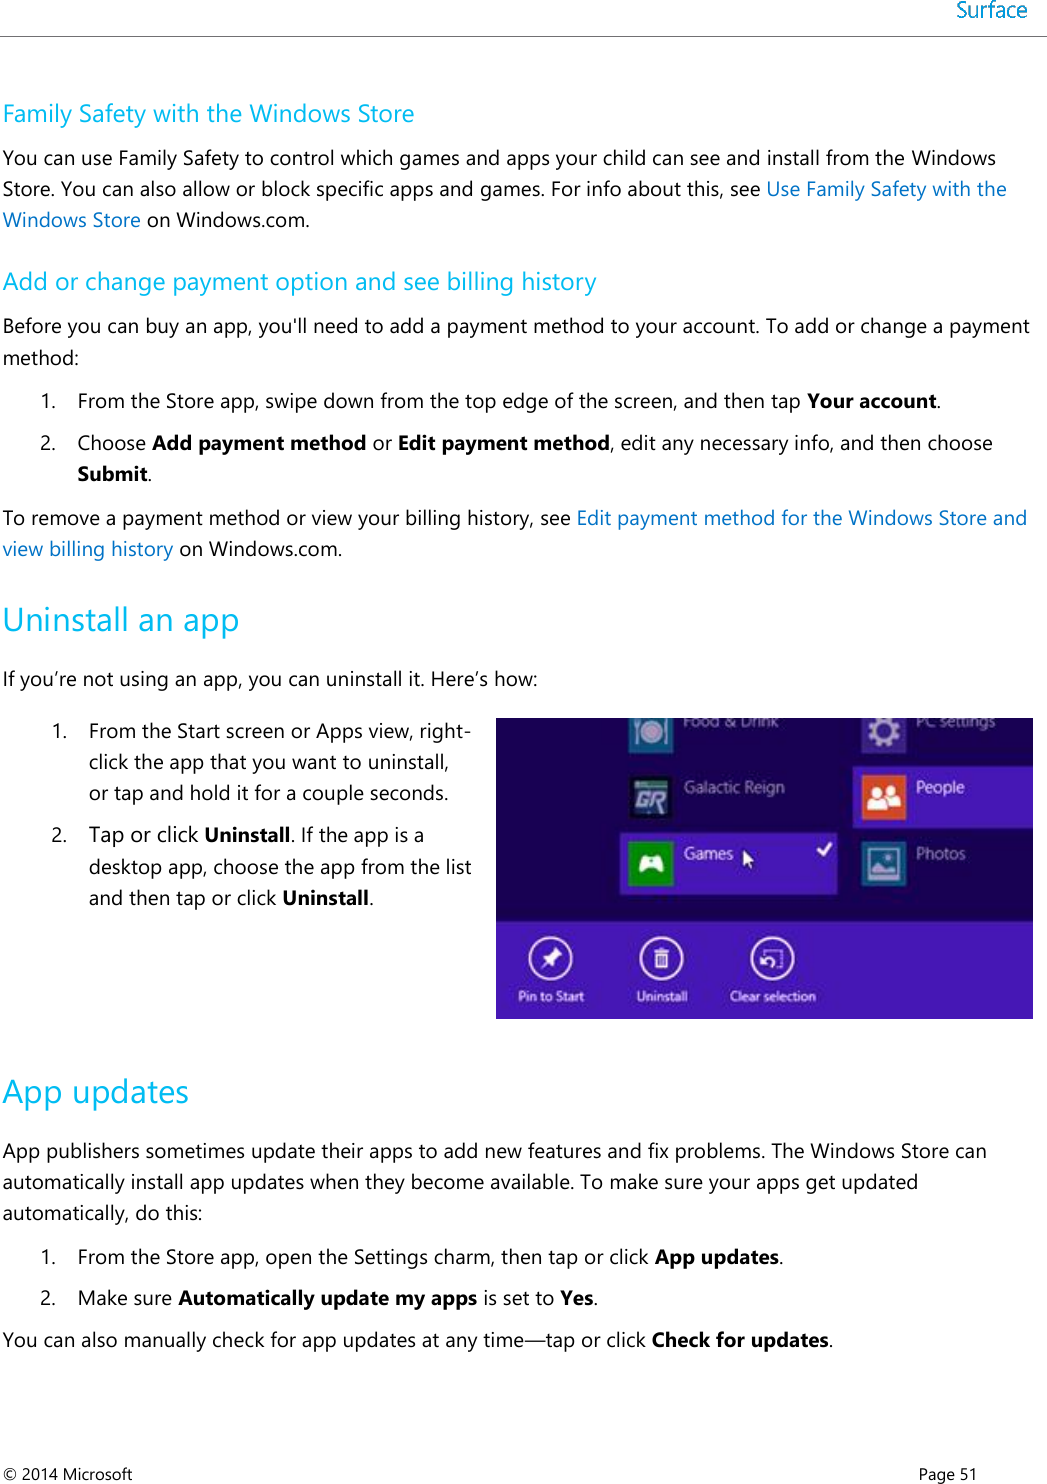  © 2014 Microsoft      Page 51  Family Safety with the Windows Store You can use Family Safety to control which games and apps your child can see and install from the Windows Store. You can also allow or block specific apps and games. For info about this, see Use Family Safety with the Windows Store on Windows.com. Add or change payment option and see billing history Before you can buy an app, you&apos;ll need to add a payment method to your account. To add or change a payment method: 1. From the Store app, swipe down from the top edge of the screen, and then tap Your account. 2. Choose Add payment method or Edit payment method, edit any necessary info, and then choose Submit. To remove a payment method or view your billing history, see Edit payment method for the Windows Store and view billing history on Windows.com.  Uninstall an app If you’re not using an app, you can uninstall it. Here’s how:  1. From the Start screen or Apps view, right-click the app that you want to uninstall, or tap and hold it for a couple seconds. 2. Tap or click Uninstall. If the app is a desktop app, choose the app from the list and then tap or click Uninstall.    App updates App publishers sometimes update their apps to add new features and fix problems. The Windows Store can automatically install app updates when they become available. To make sure your apps get updated automatically, do this: 1. From the Store app, open the Settings charm, then tap or click App updates. 2. Make sure Automatically update my apps is set to Yes.  You can also manually check for app updates at any time—tap or click Check for updates.  